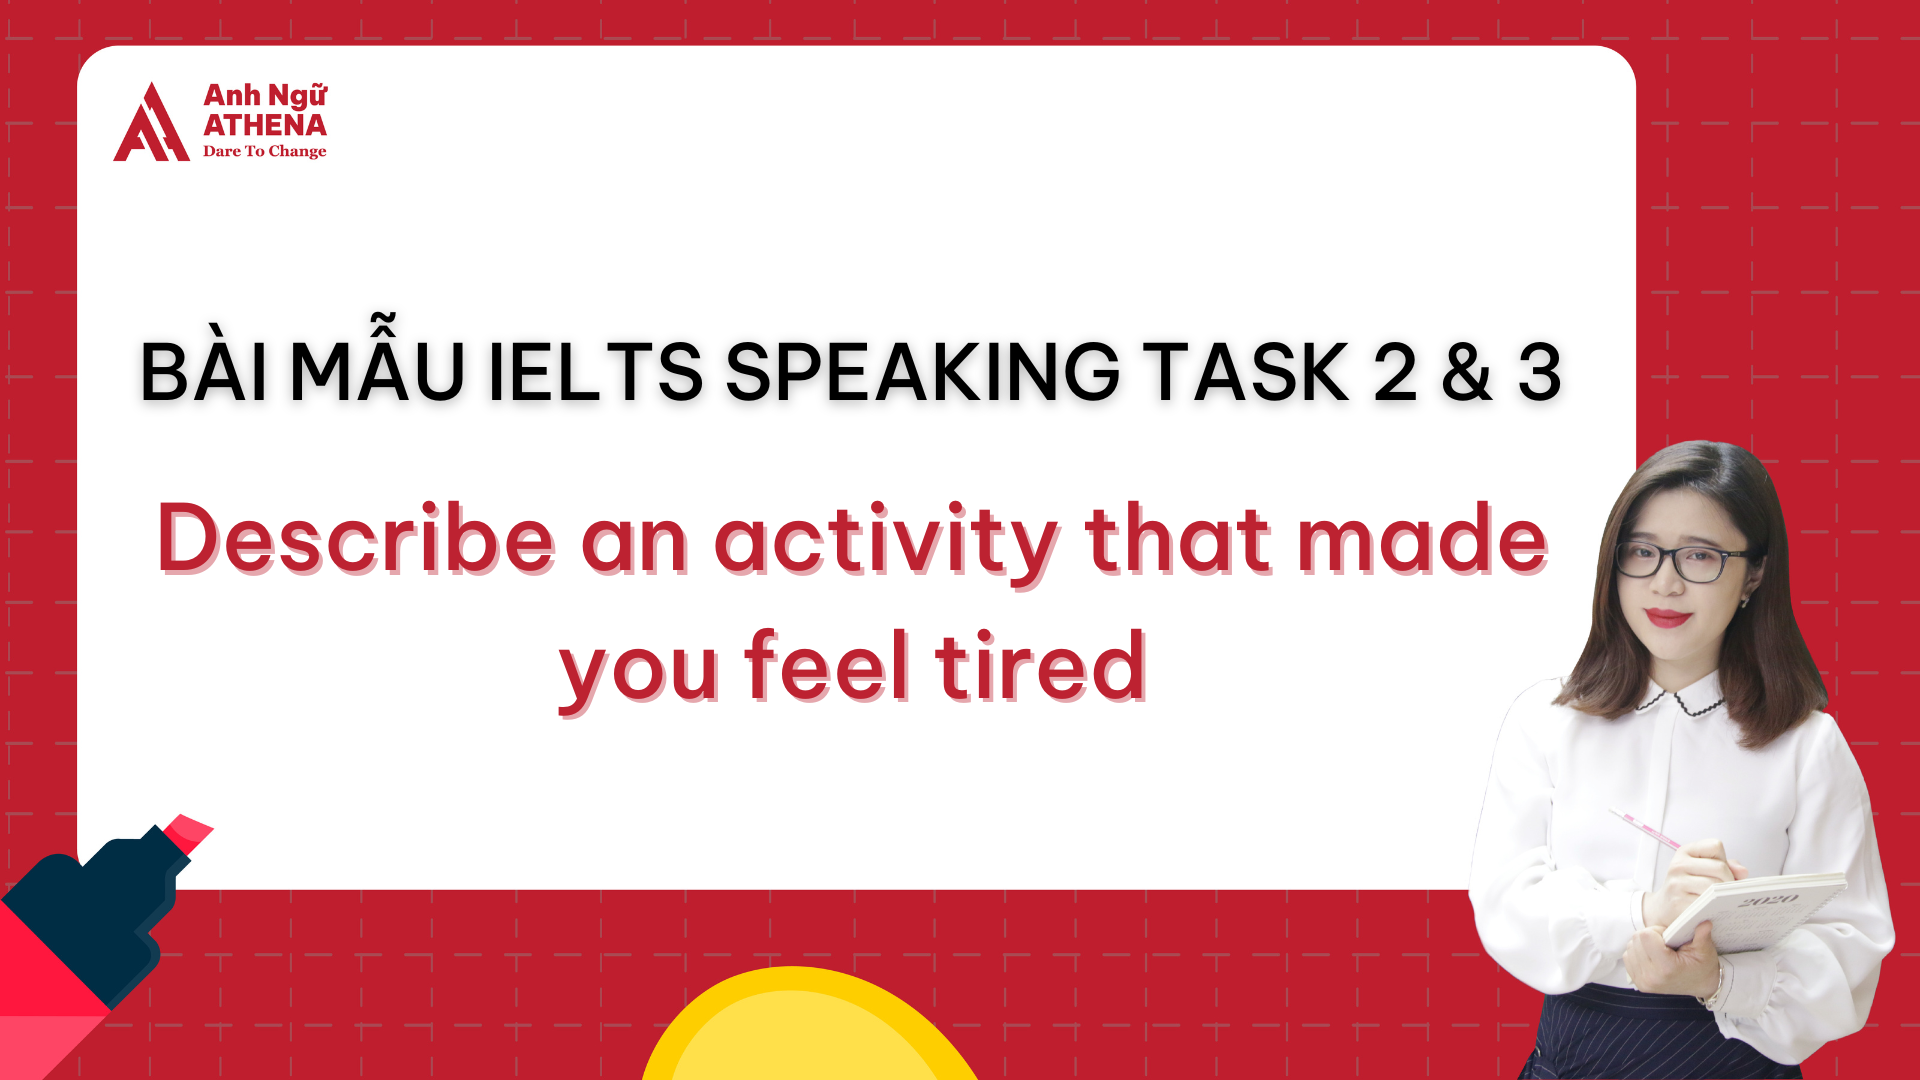 Bài mẫu IELTS Speaking Part 2 & 3 - Topic: Describe an activity that made you feel tired